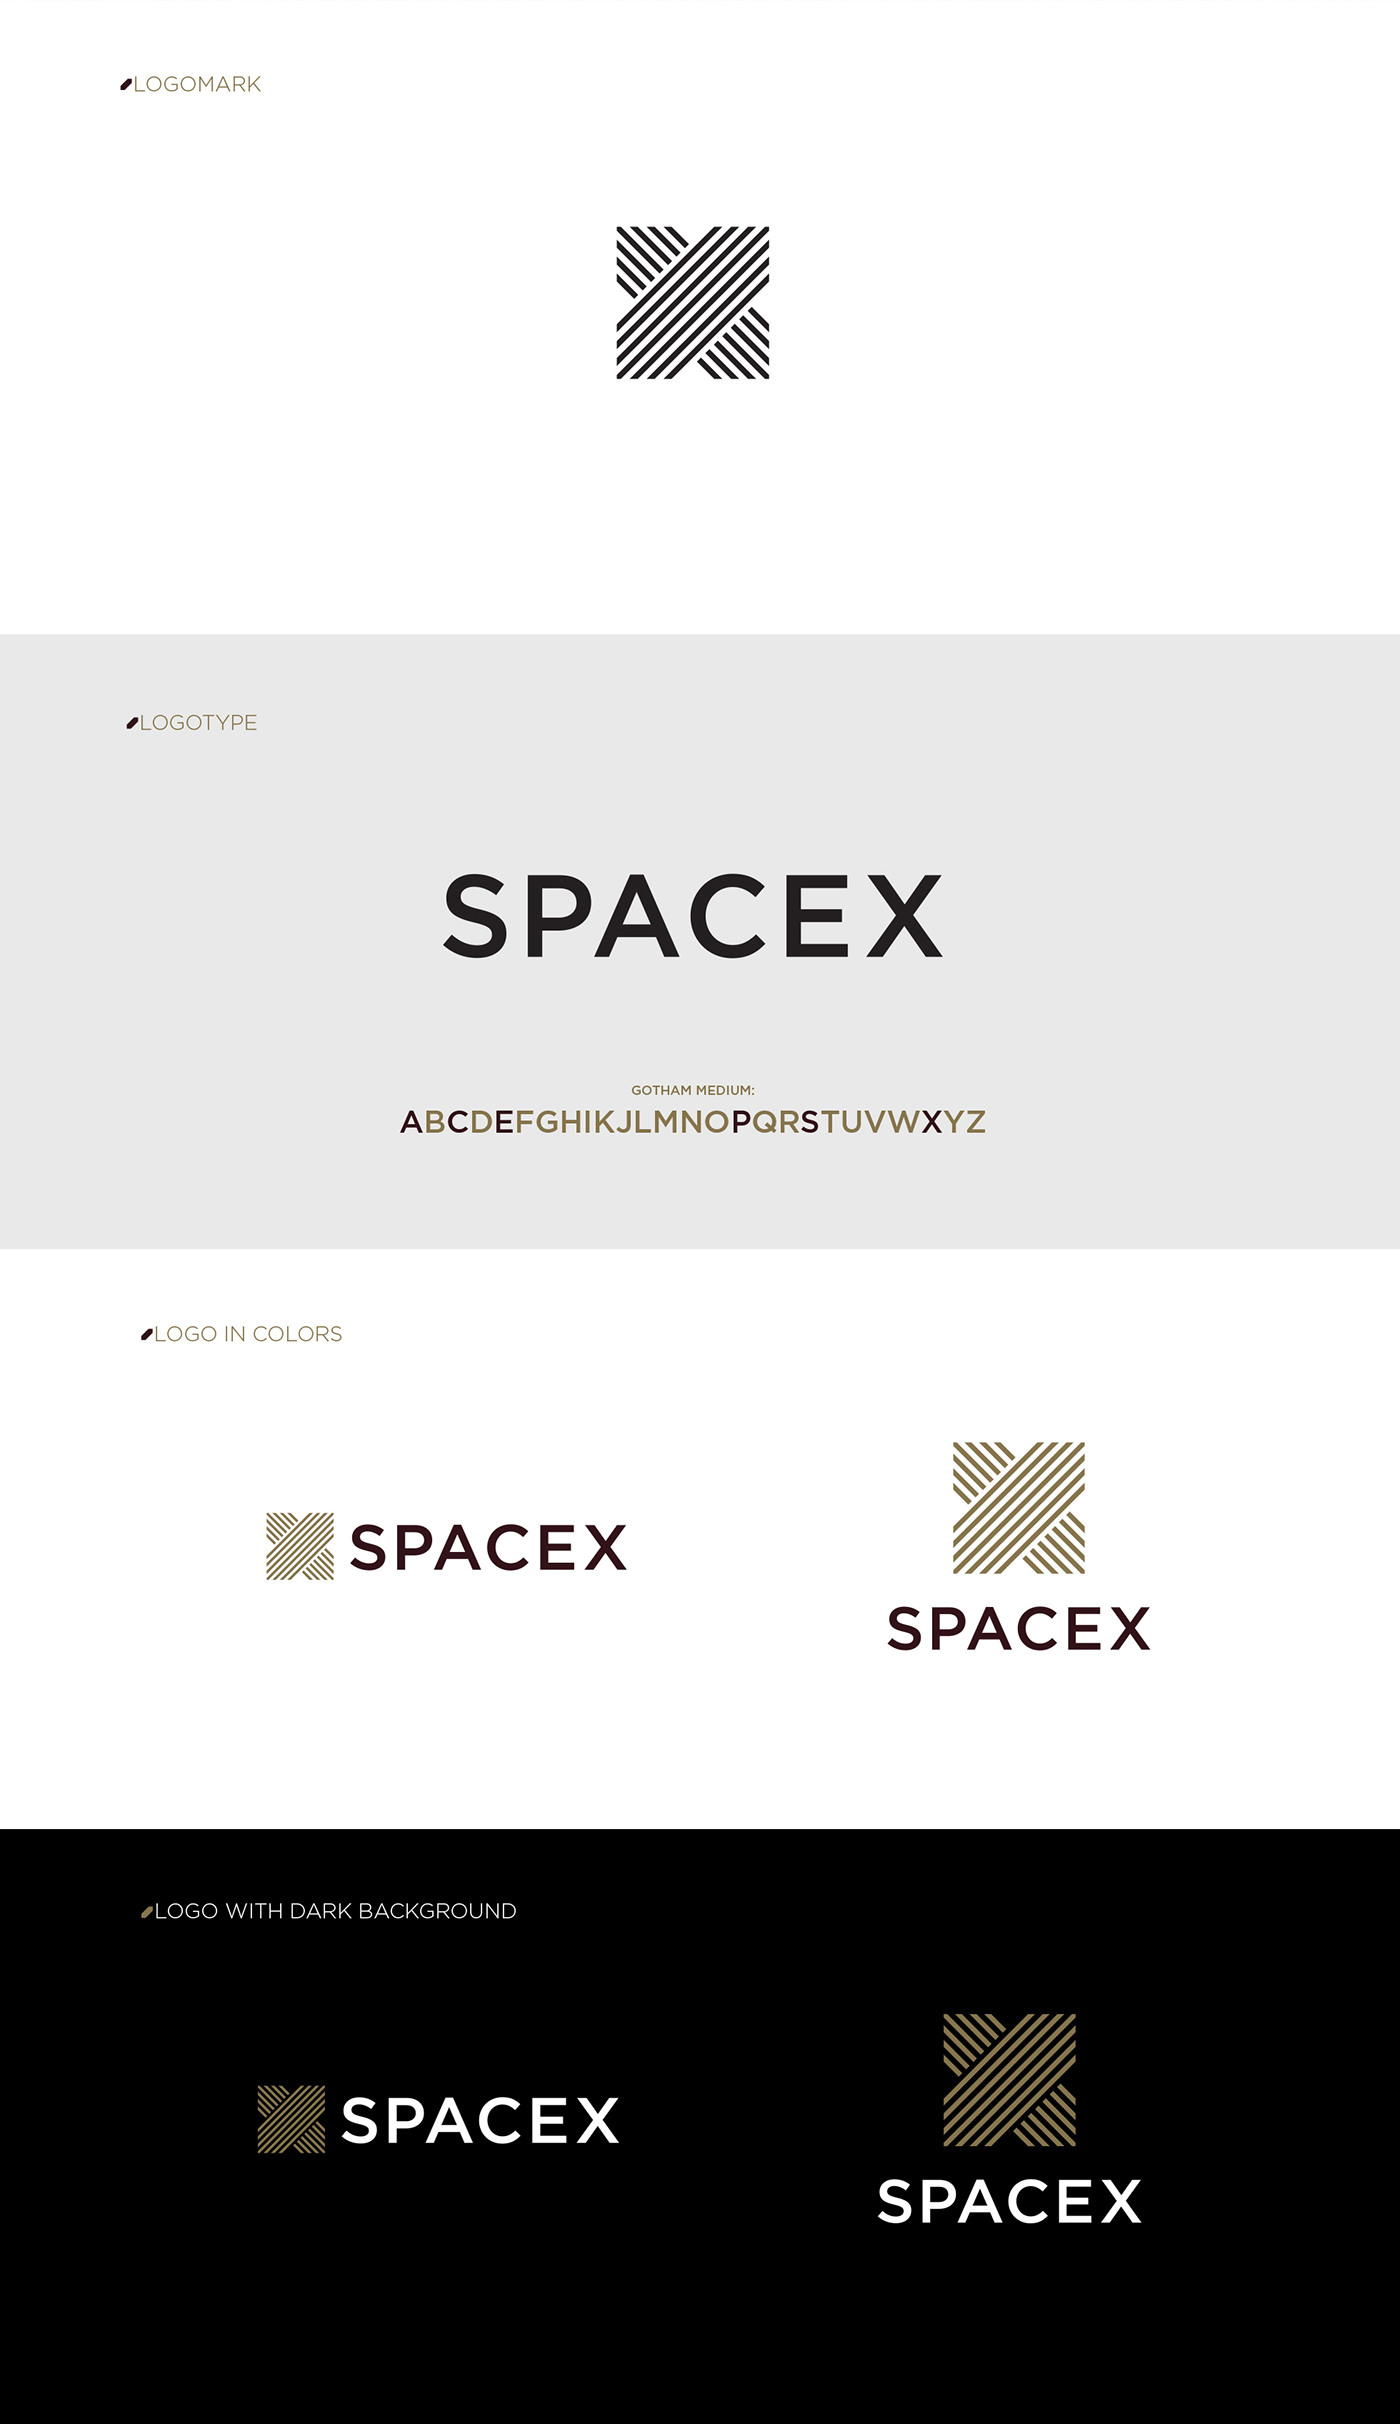 ADAA spacex ACCD Rebrand editorial brand identity logo poster interactive corporate Stationery brand identity manual print